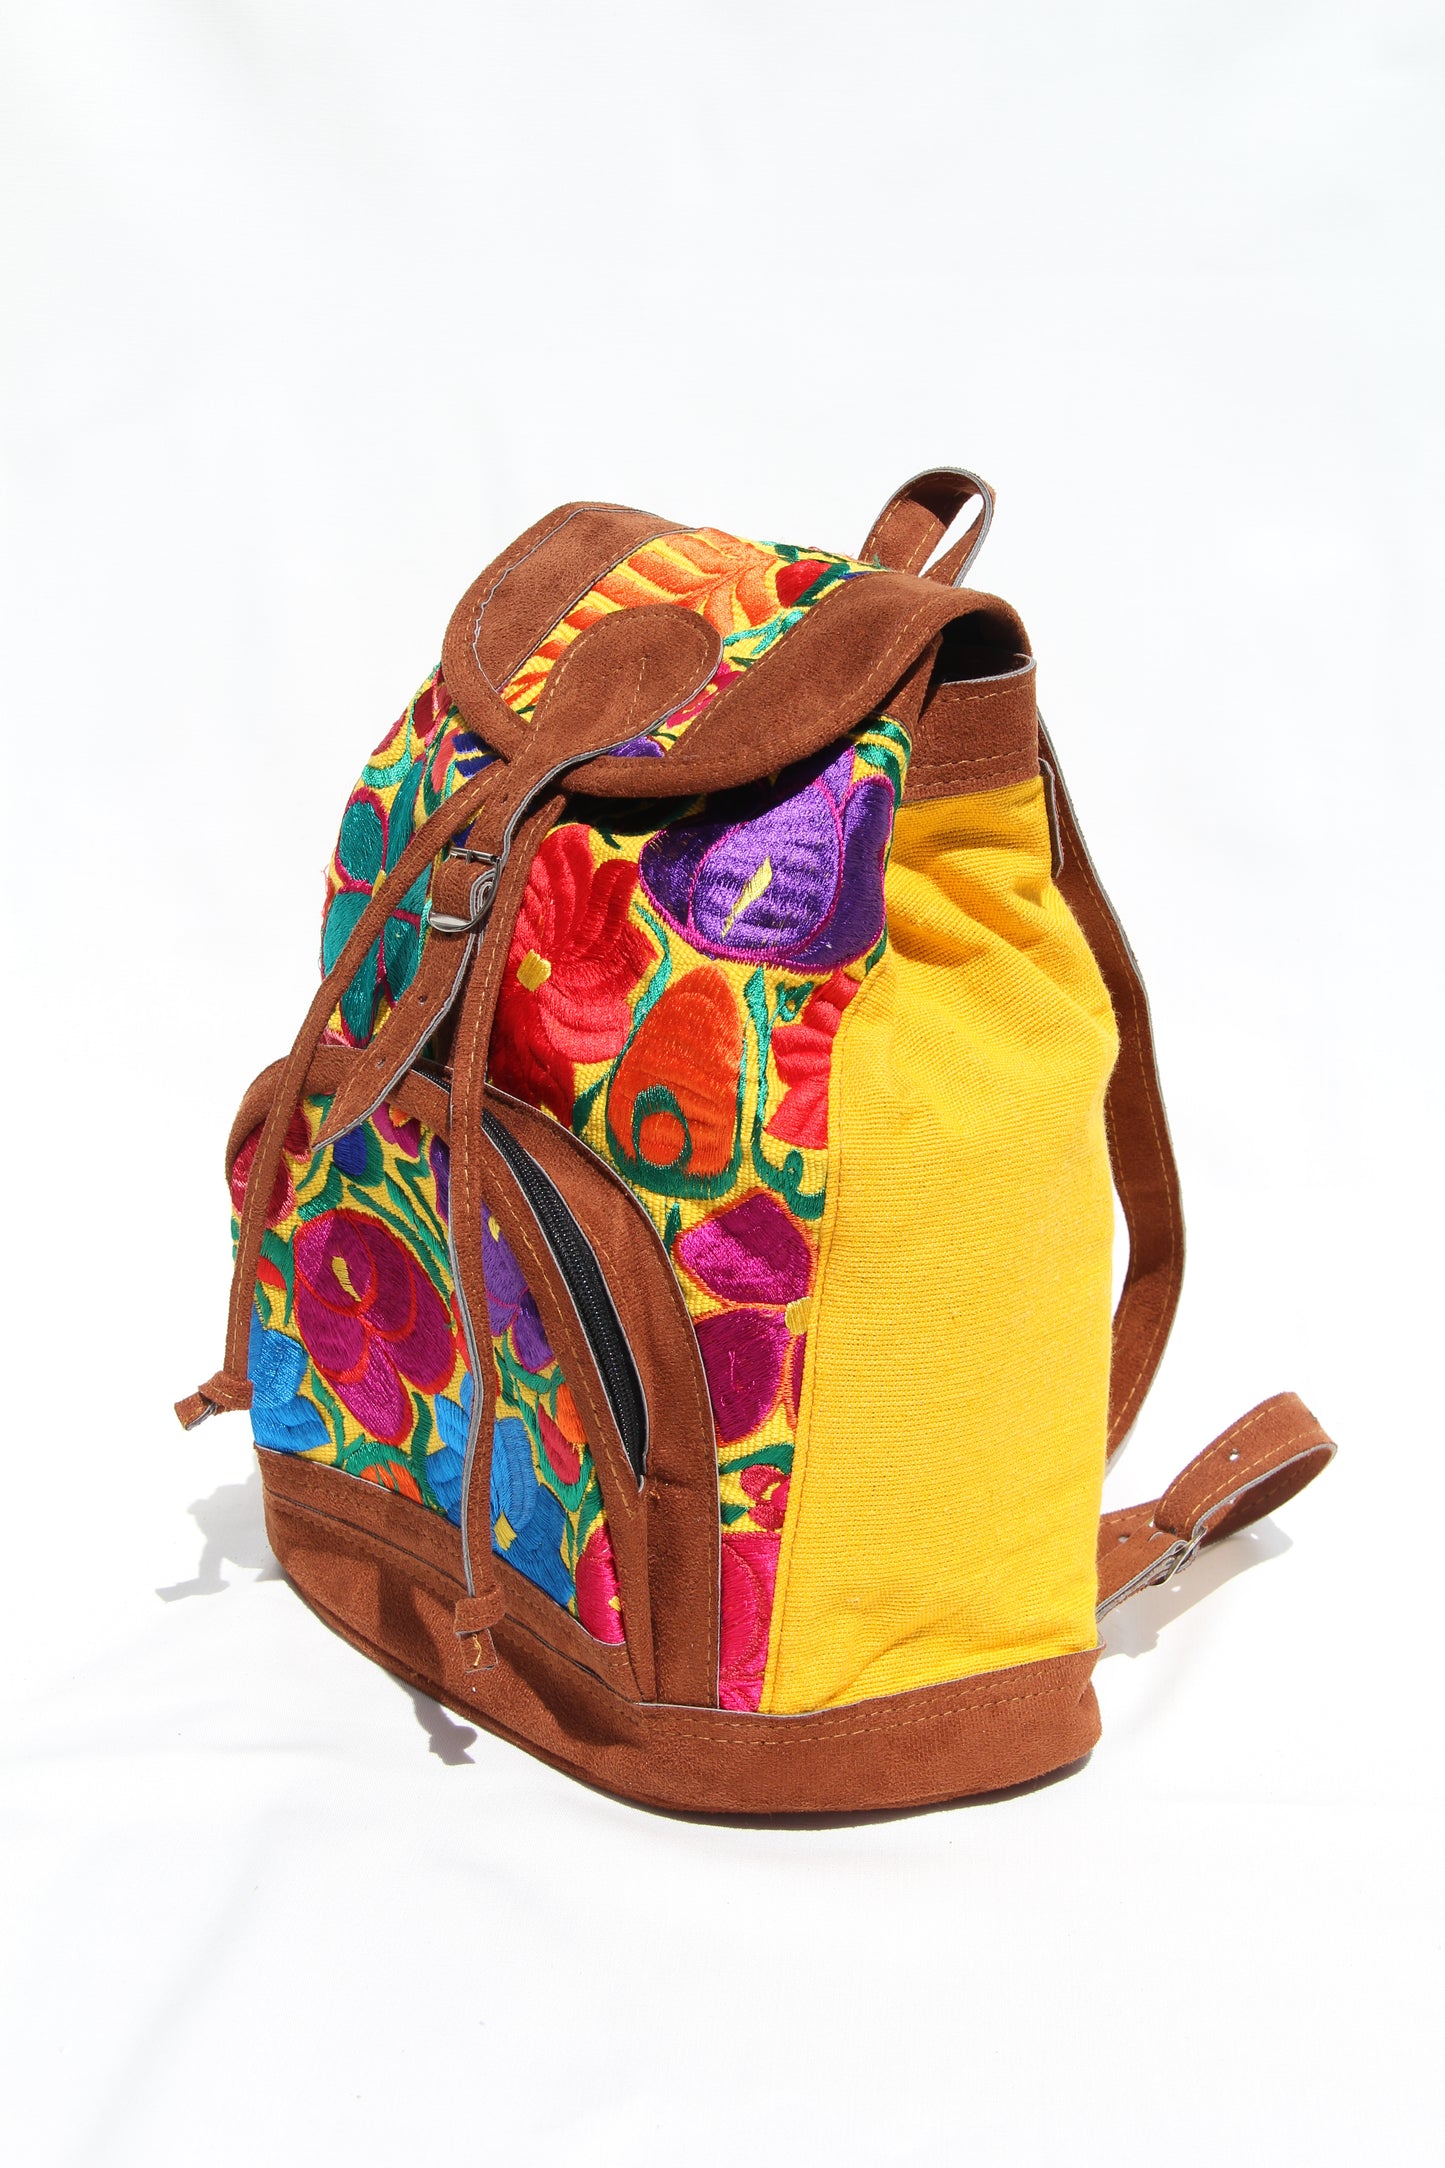 colorful huipil floral embroidery backpack with yellow woven fabric and faux suede contrast with adjustable straps and front buckle closure with front zipper pocket the prefect travel, hiking or beach bag unique bag great for back to school take this bag on your next destination boho bag and hippie style bag a great standout accessories made in Guatemala